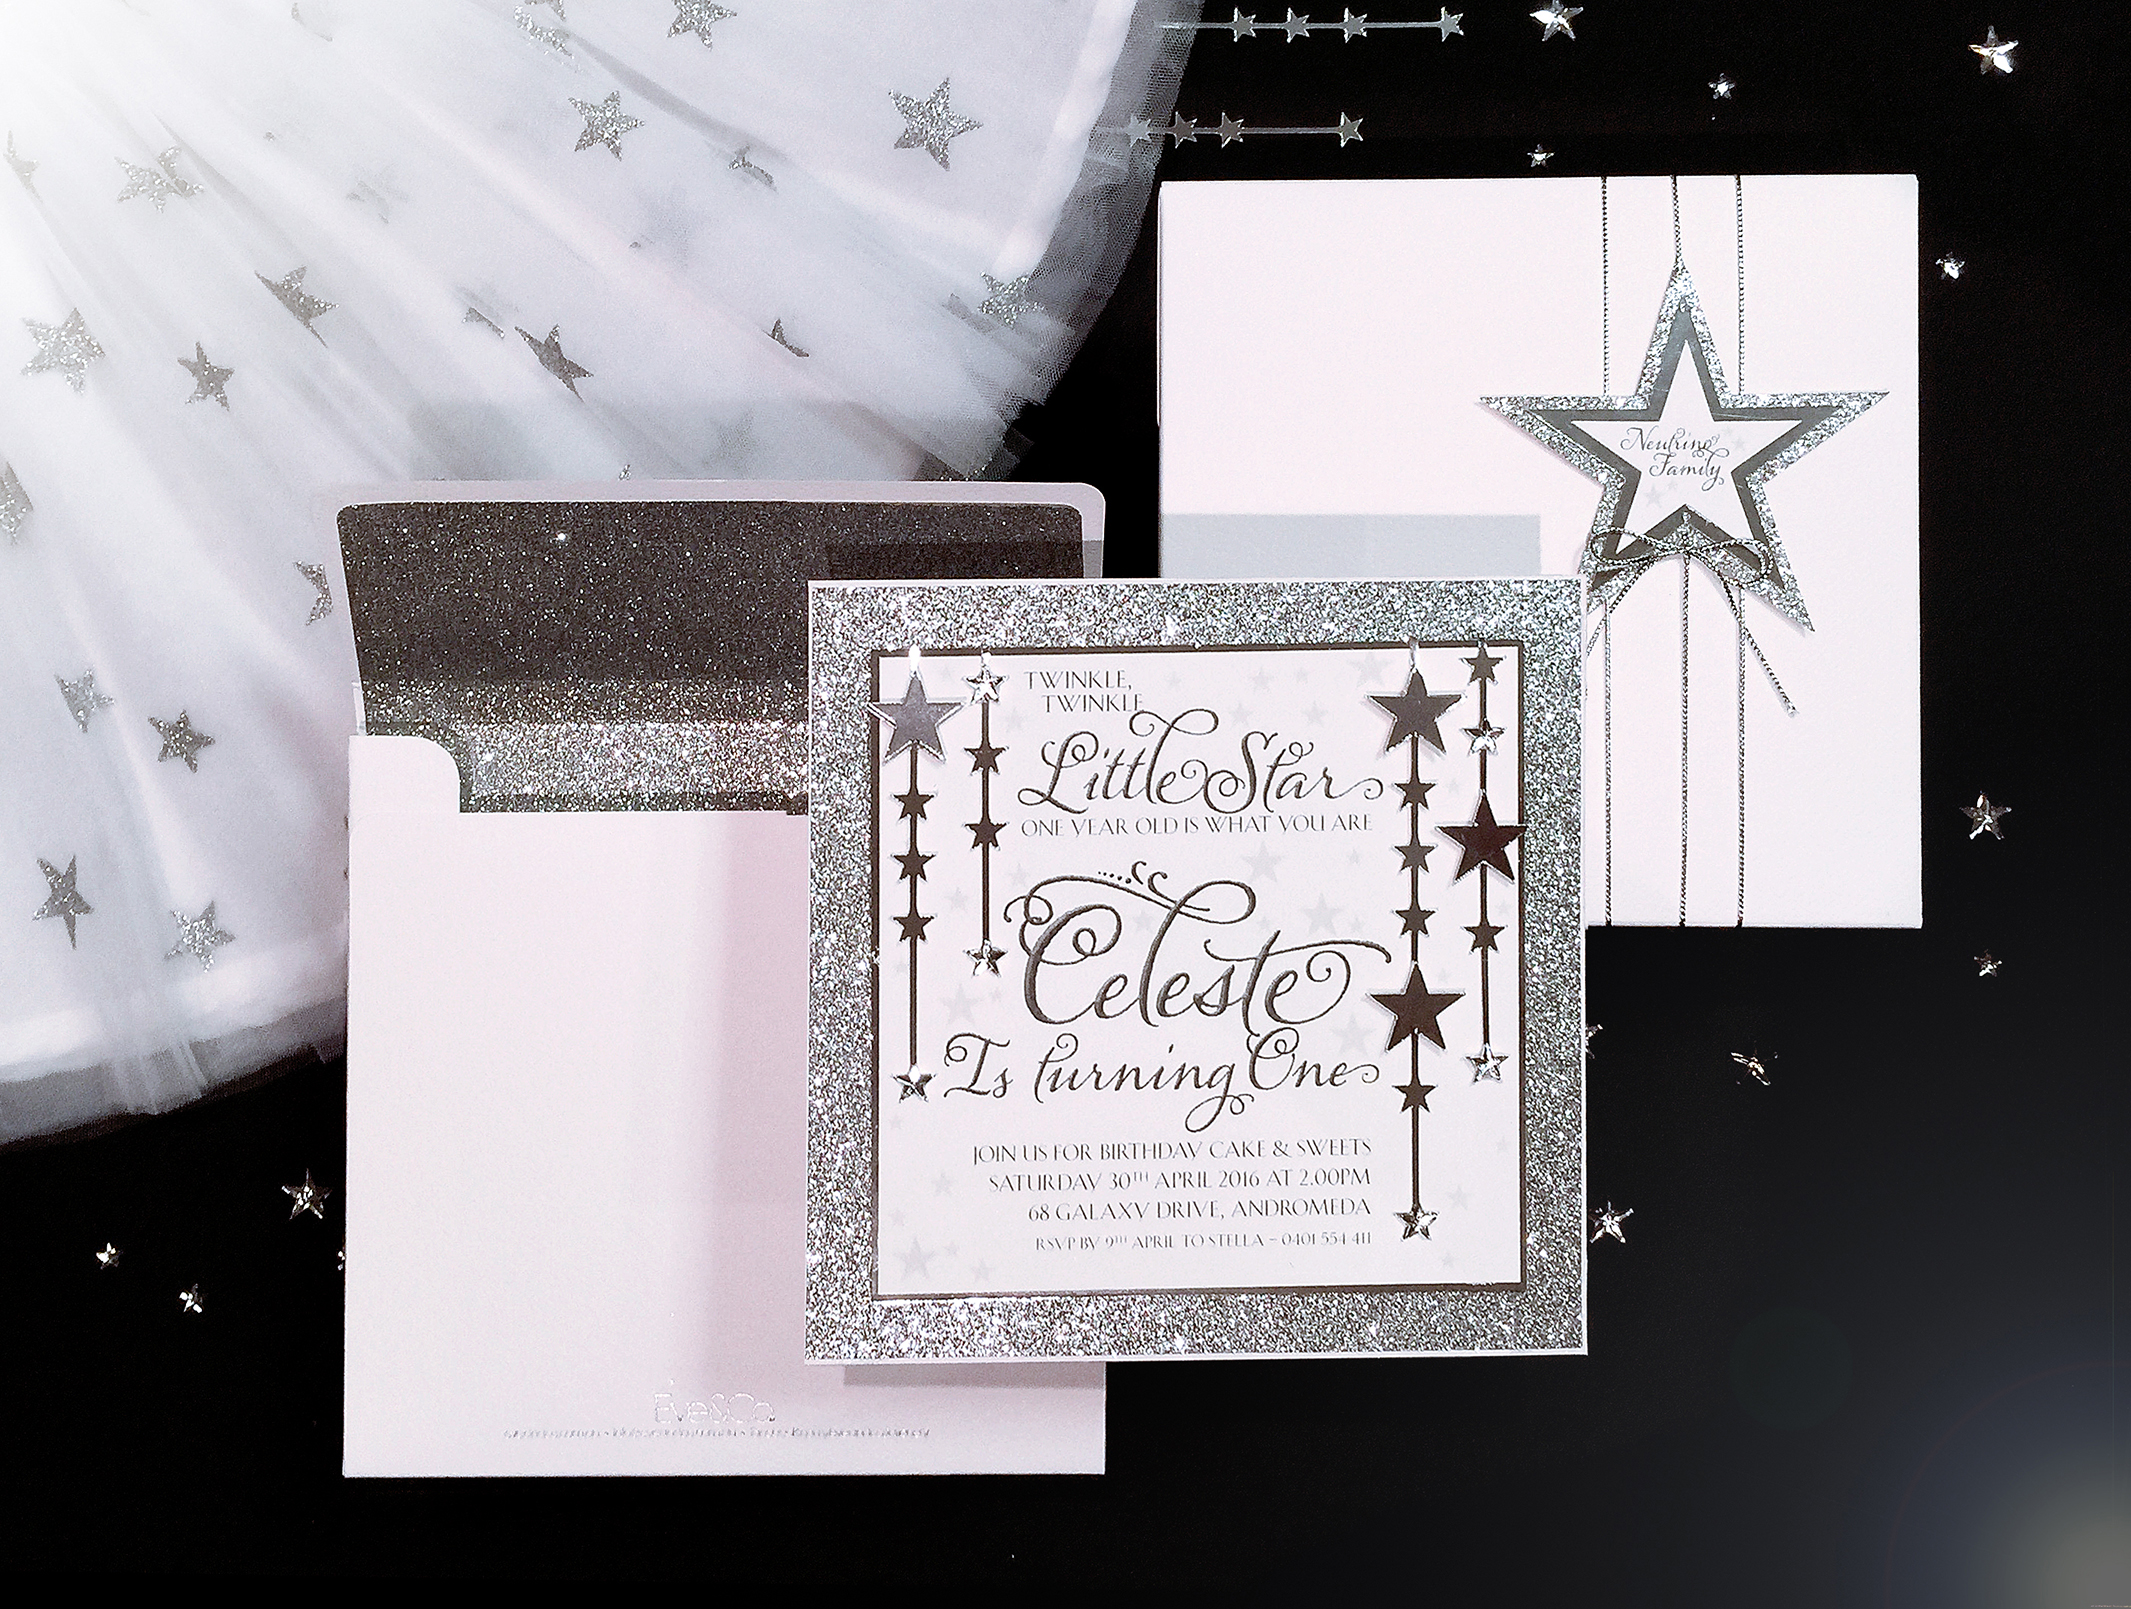 Twinkle Twinkle little star invitation - Eve and Co